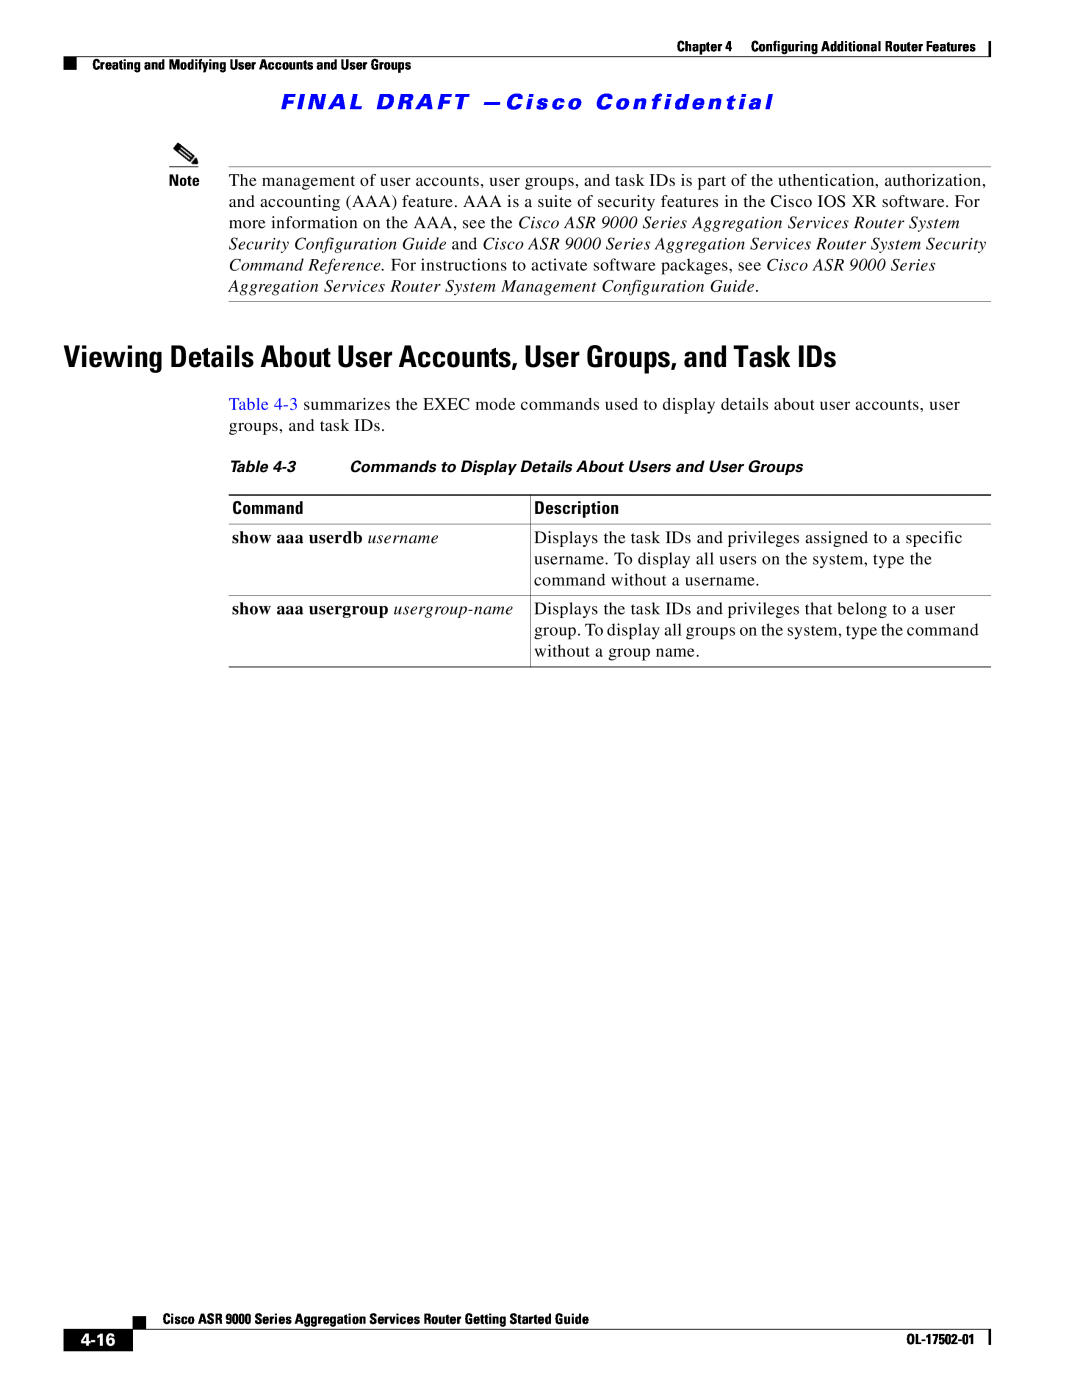 Cisco Systems A9KMOD80TR Viewing Details About User Accounts, User Groups, and Task IDs, show aaa userdb username, 4-16 